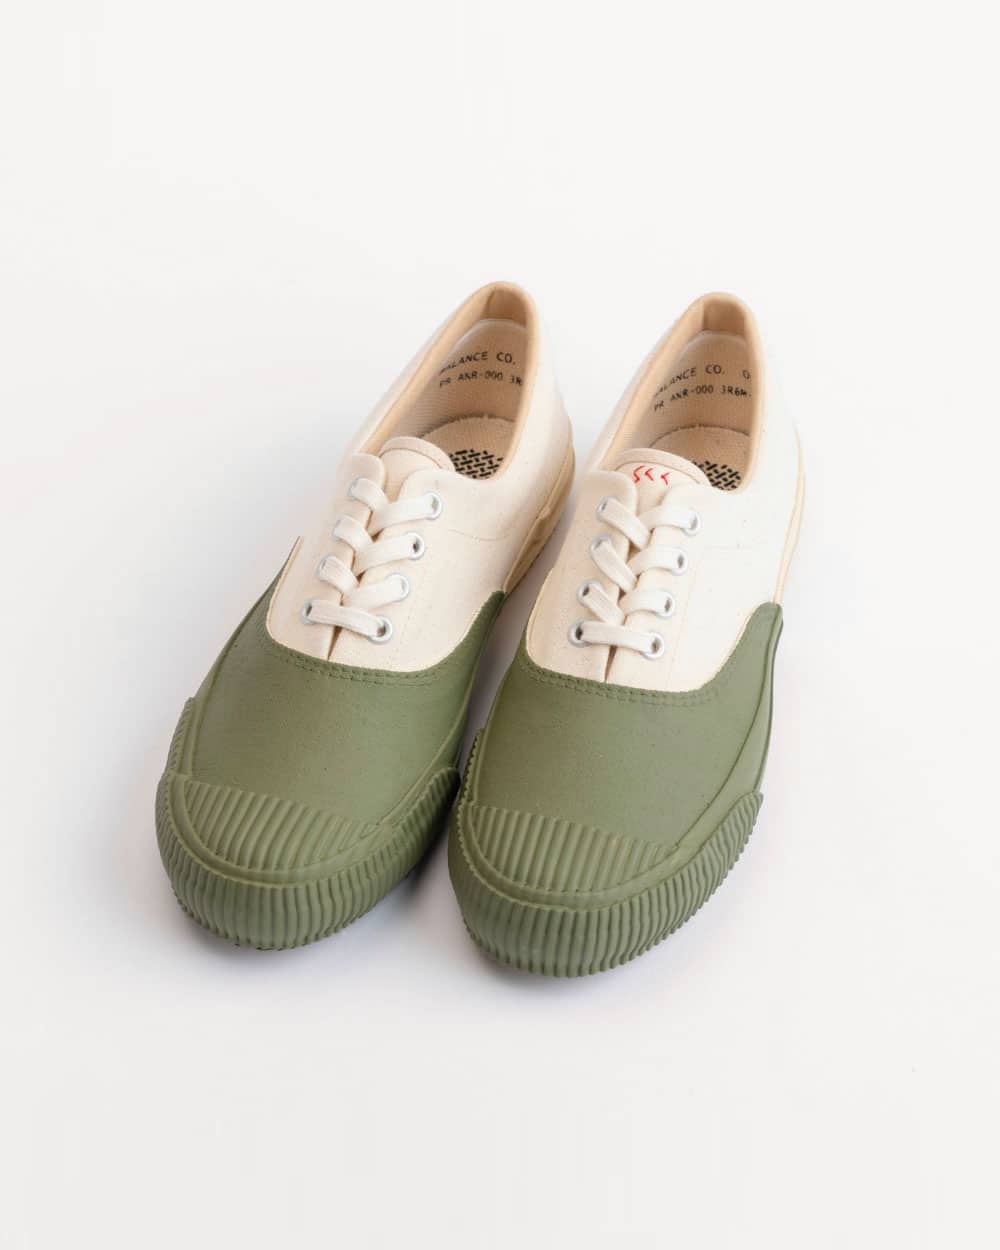 PRAS Shellcap Deck Sneakers Hand Painted Olive — Those That Know